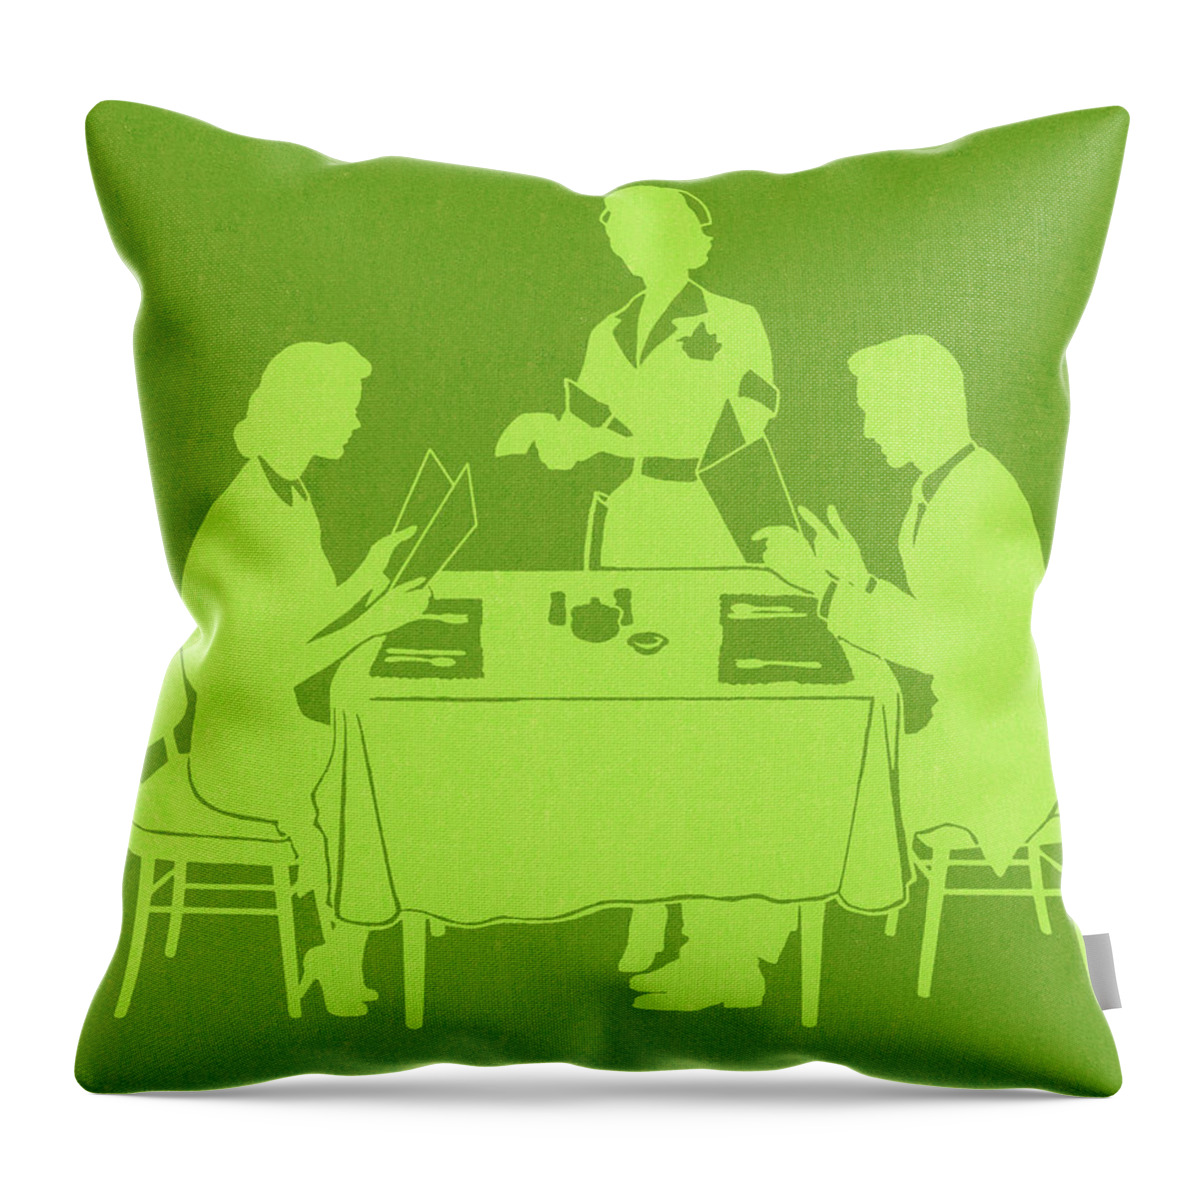 Adult Throw Pillow featuring the drawing People at Restaurant by CSA Images